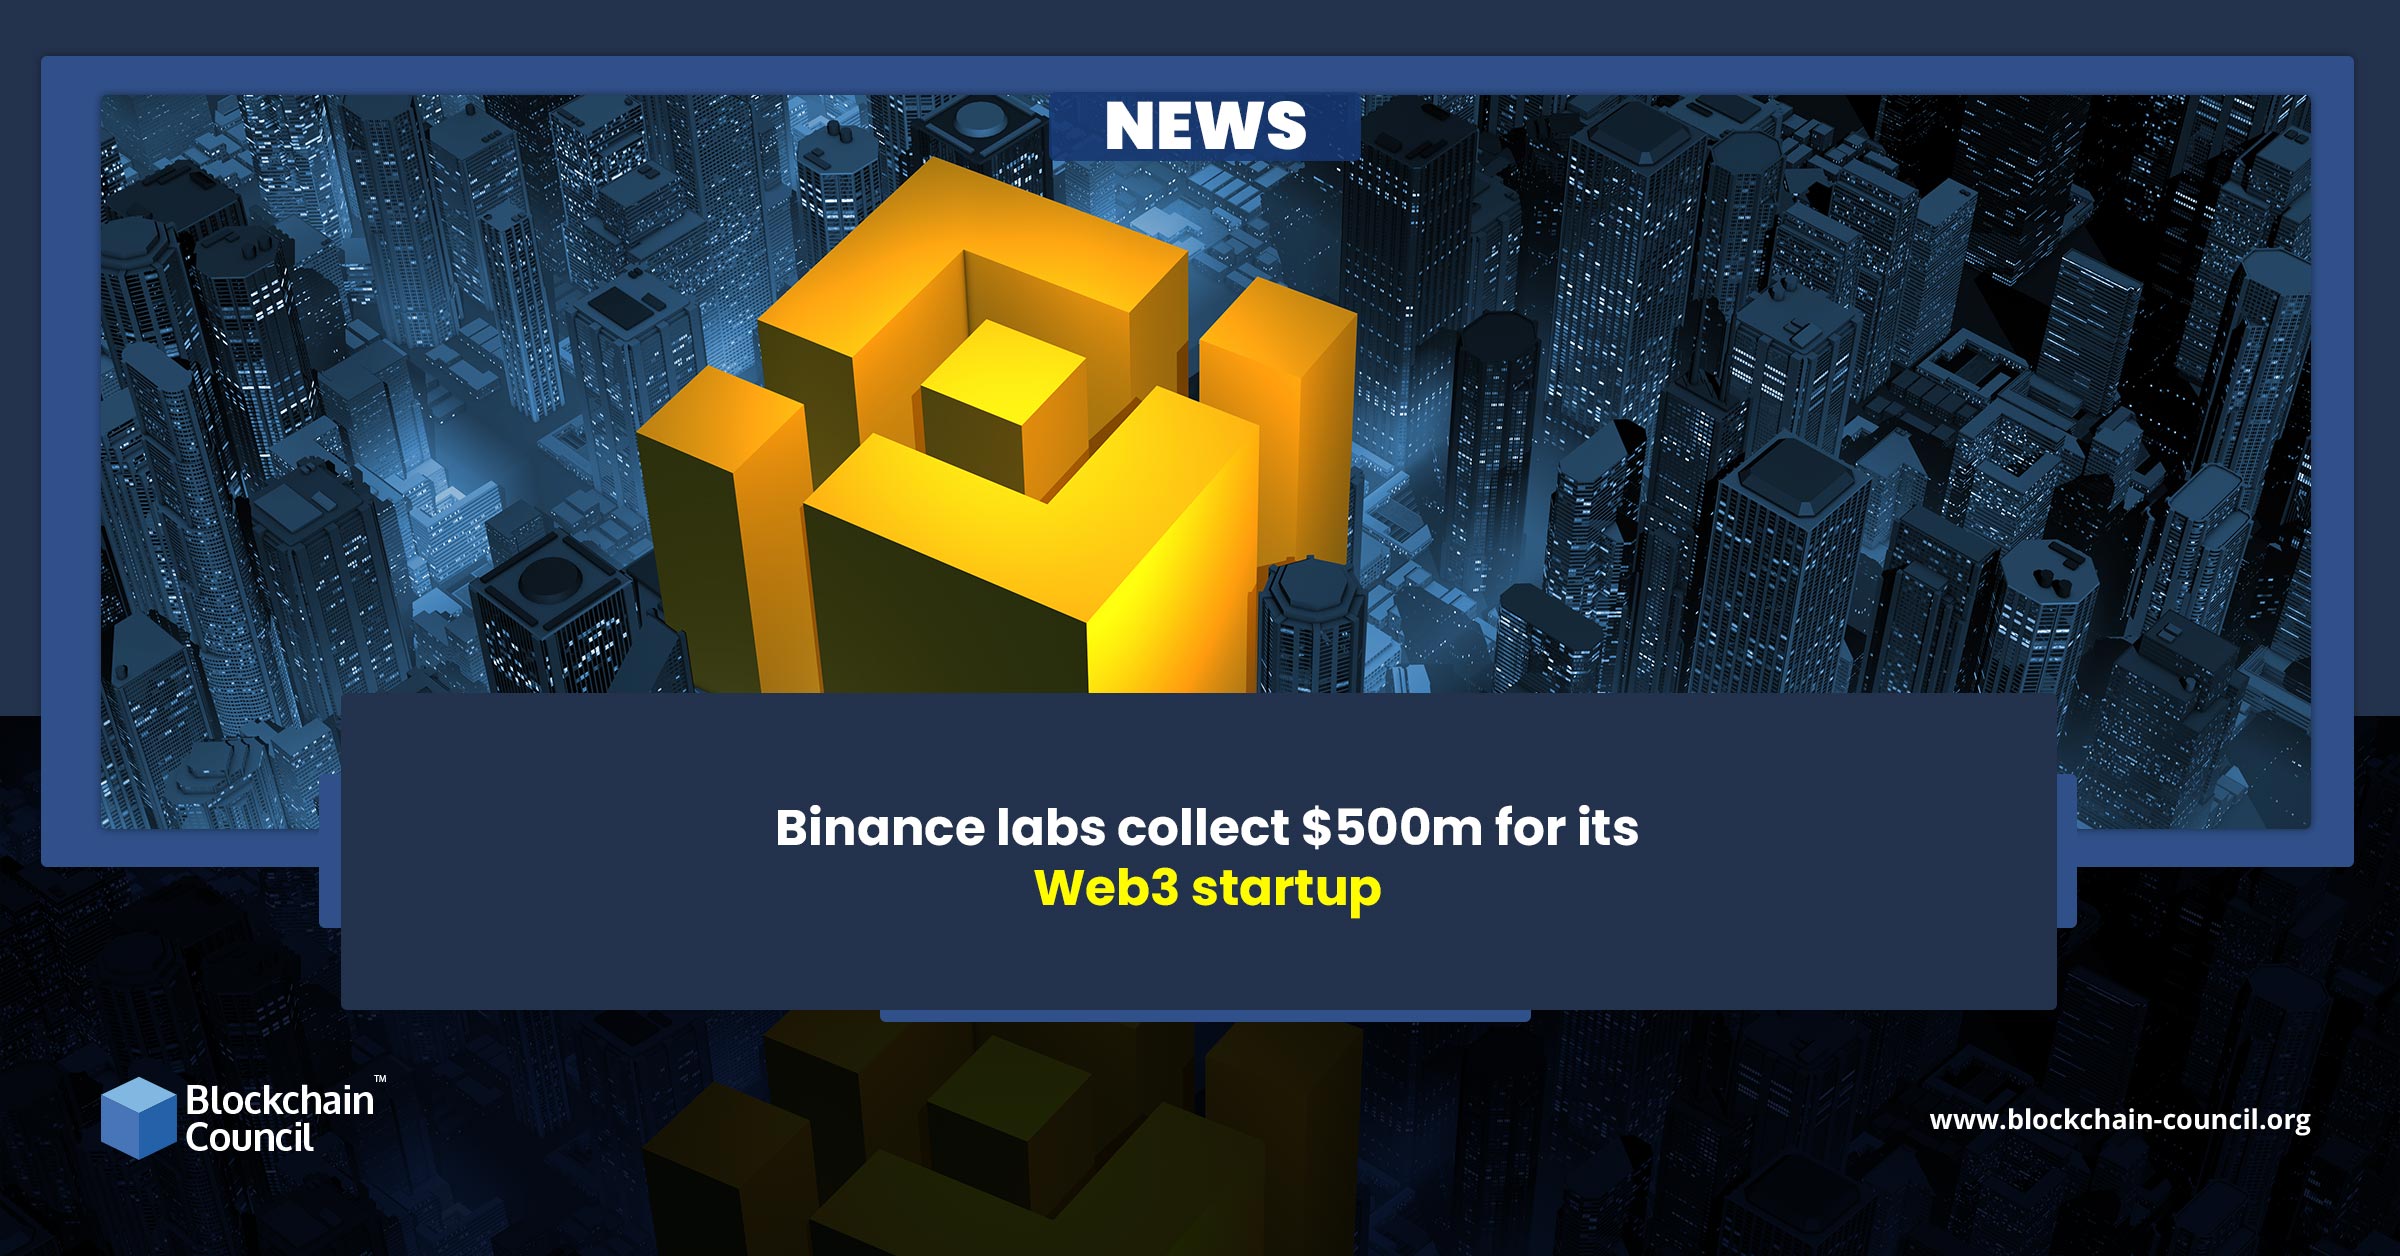 Binance labs collect $500m for its Web3 startup